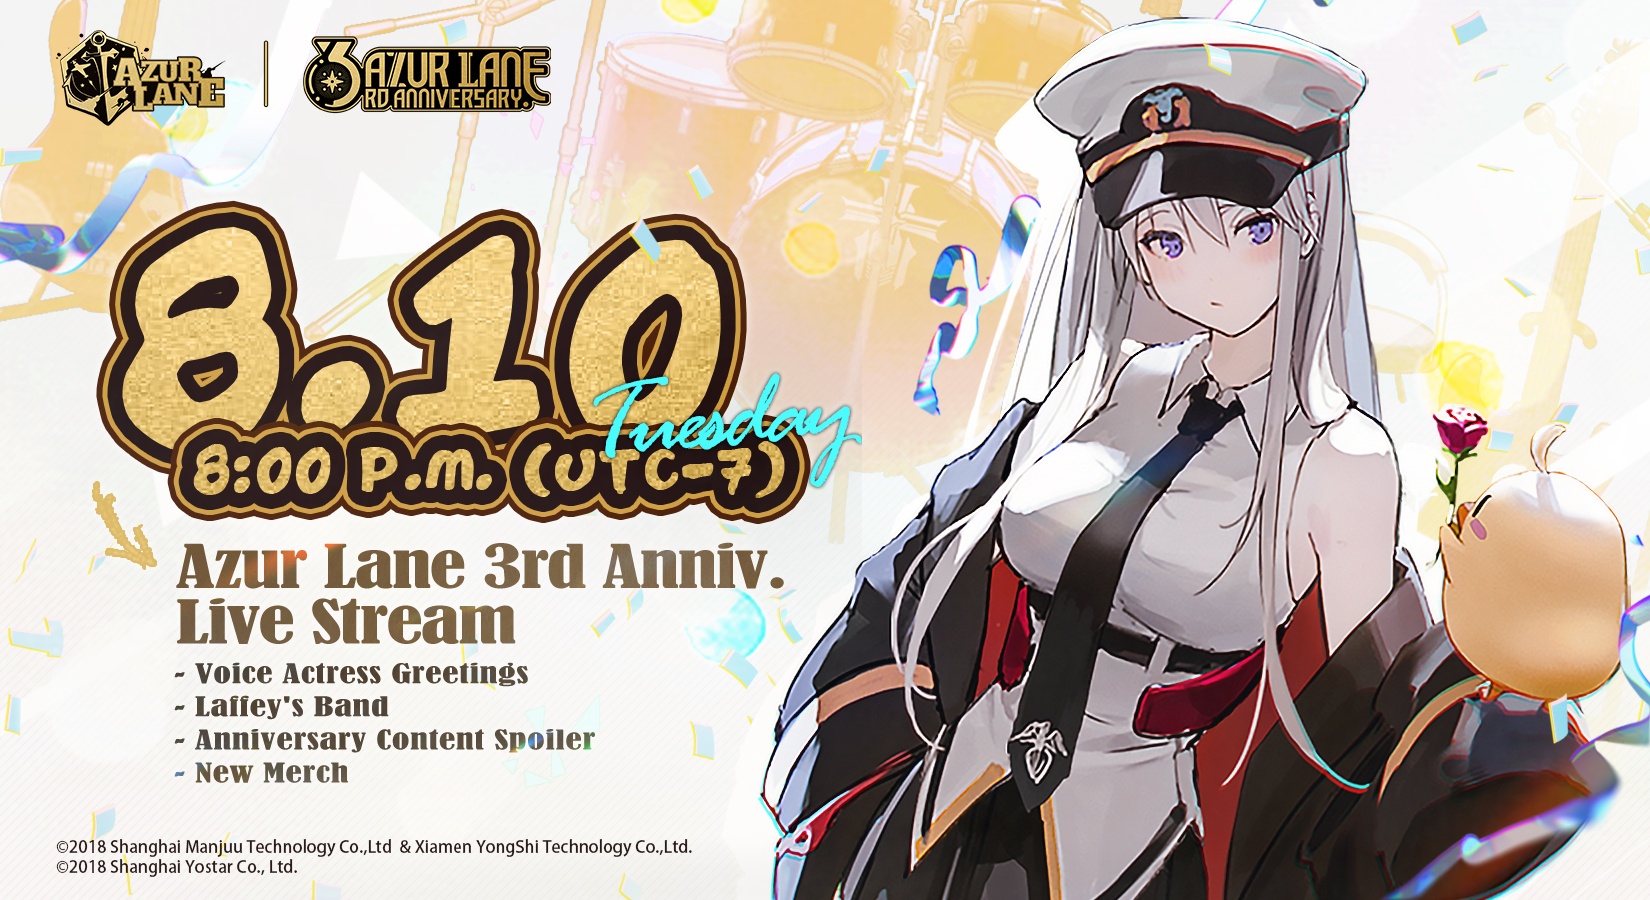 Azur Lane: Kinu's New Memory 'As Cool As A Demon' is Now Available